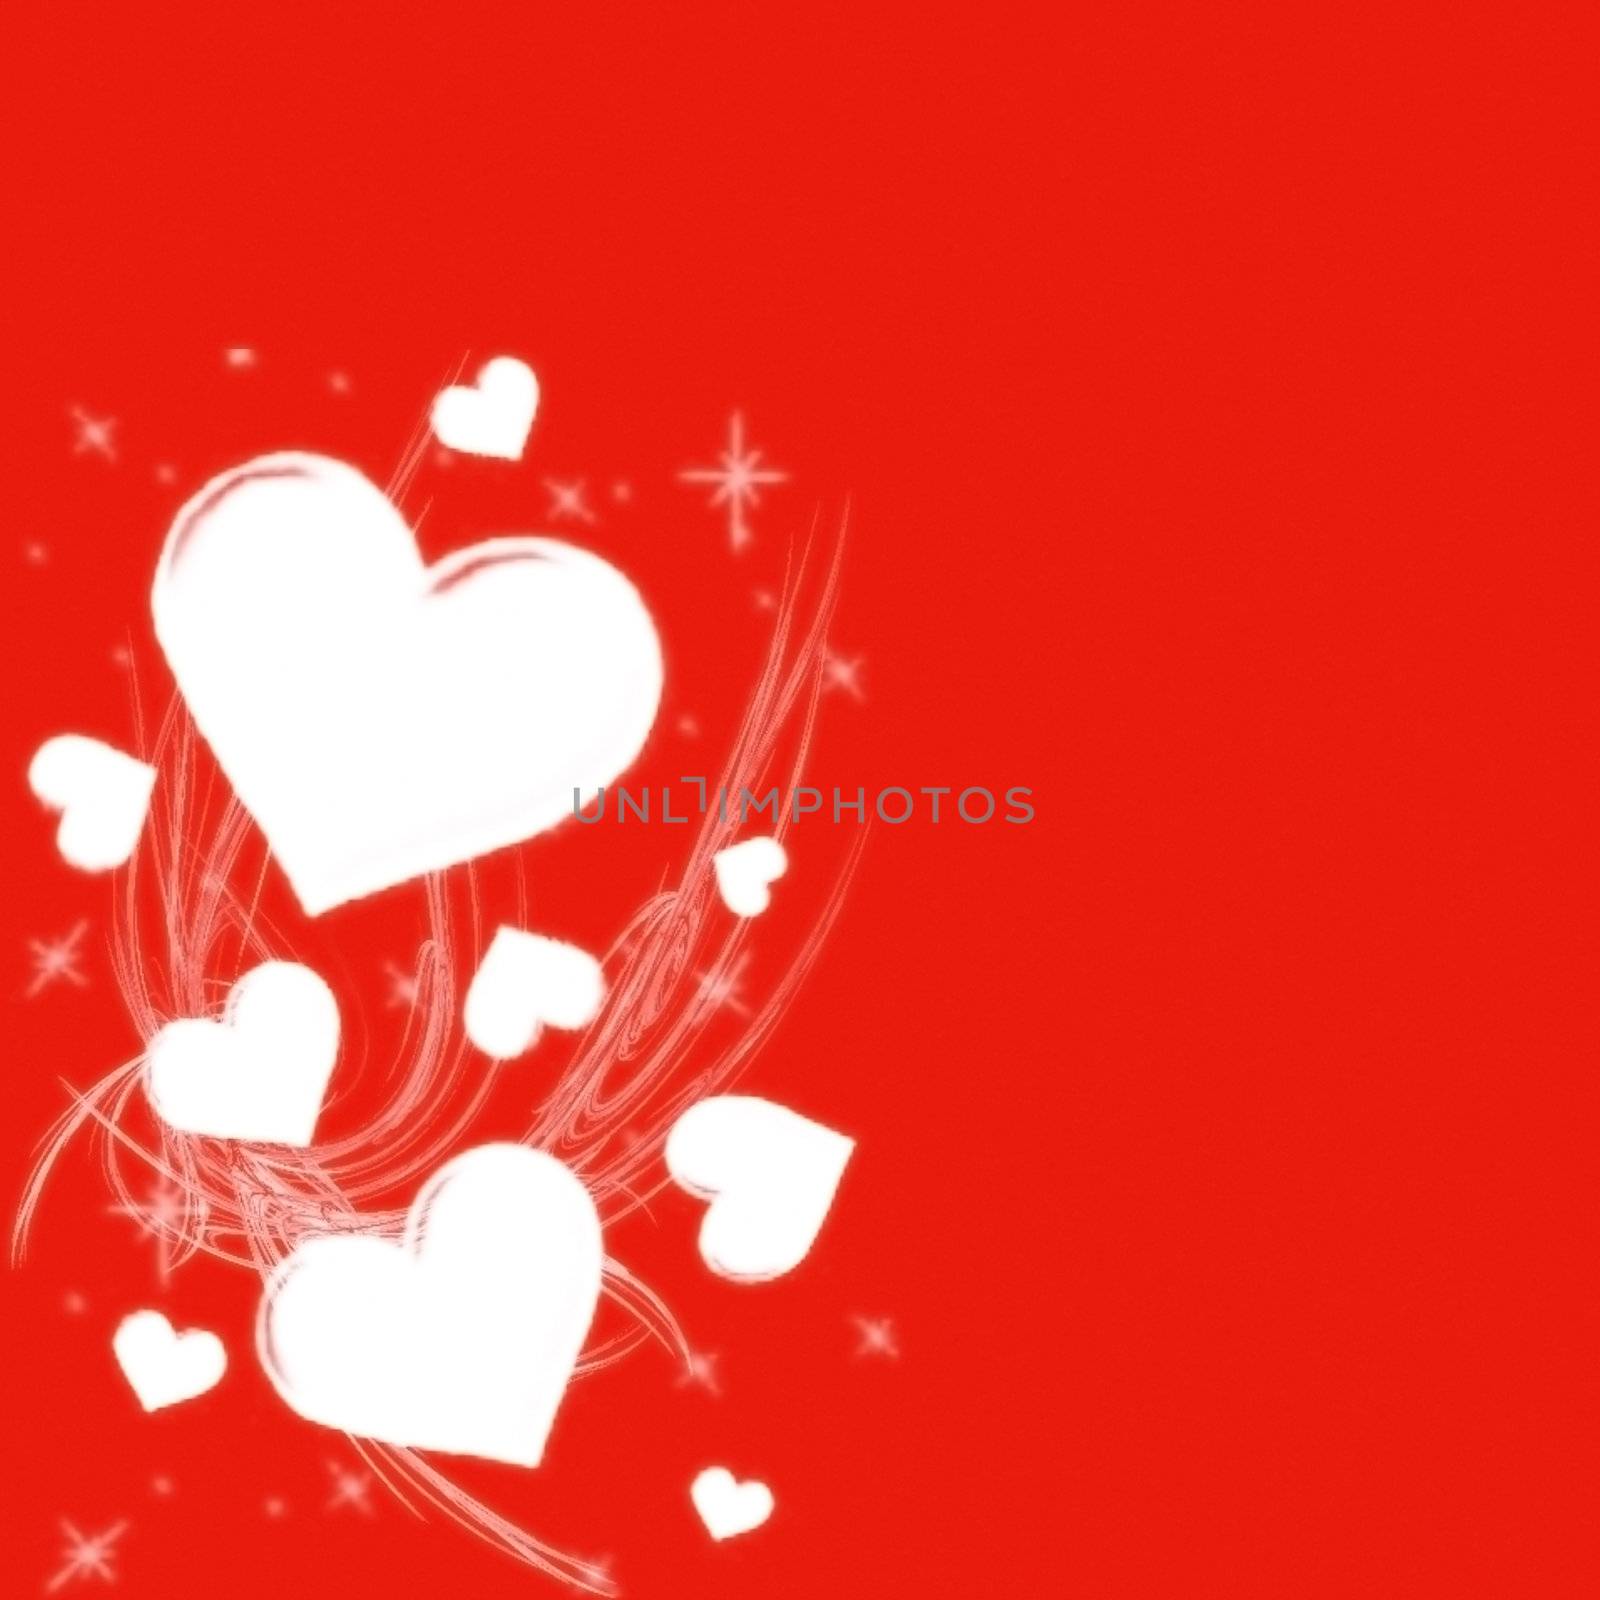 red heart floral swirl patternfor valentines,cards,note paper,background,